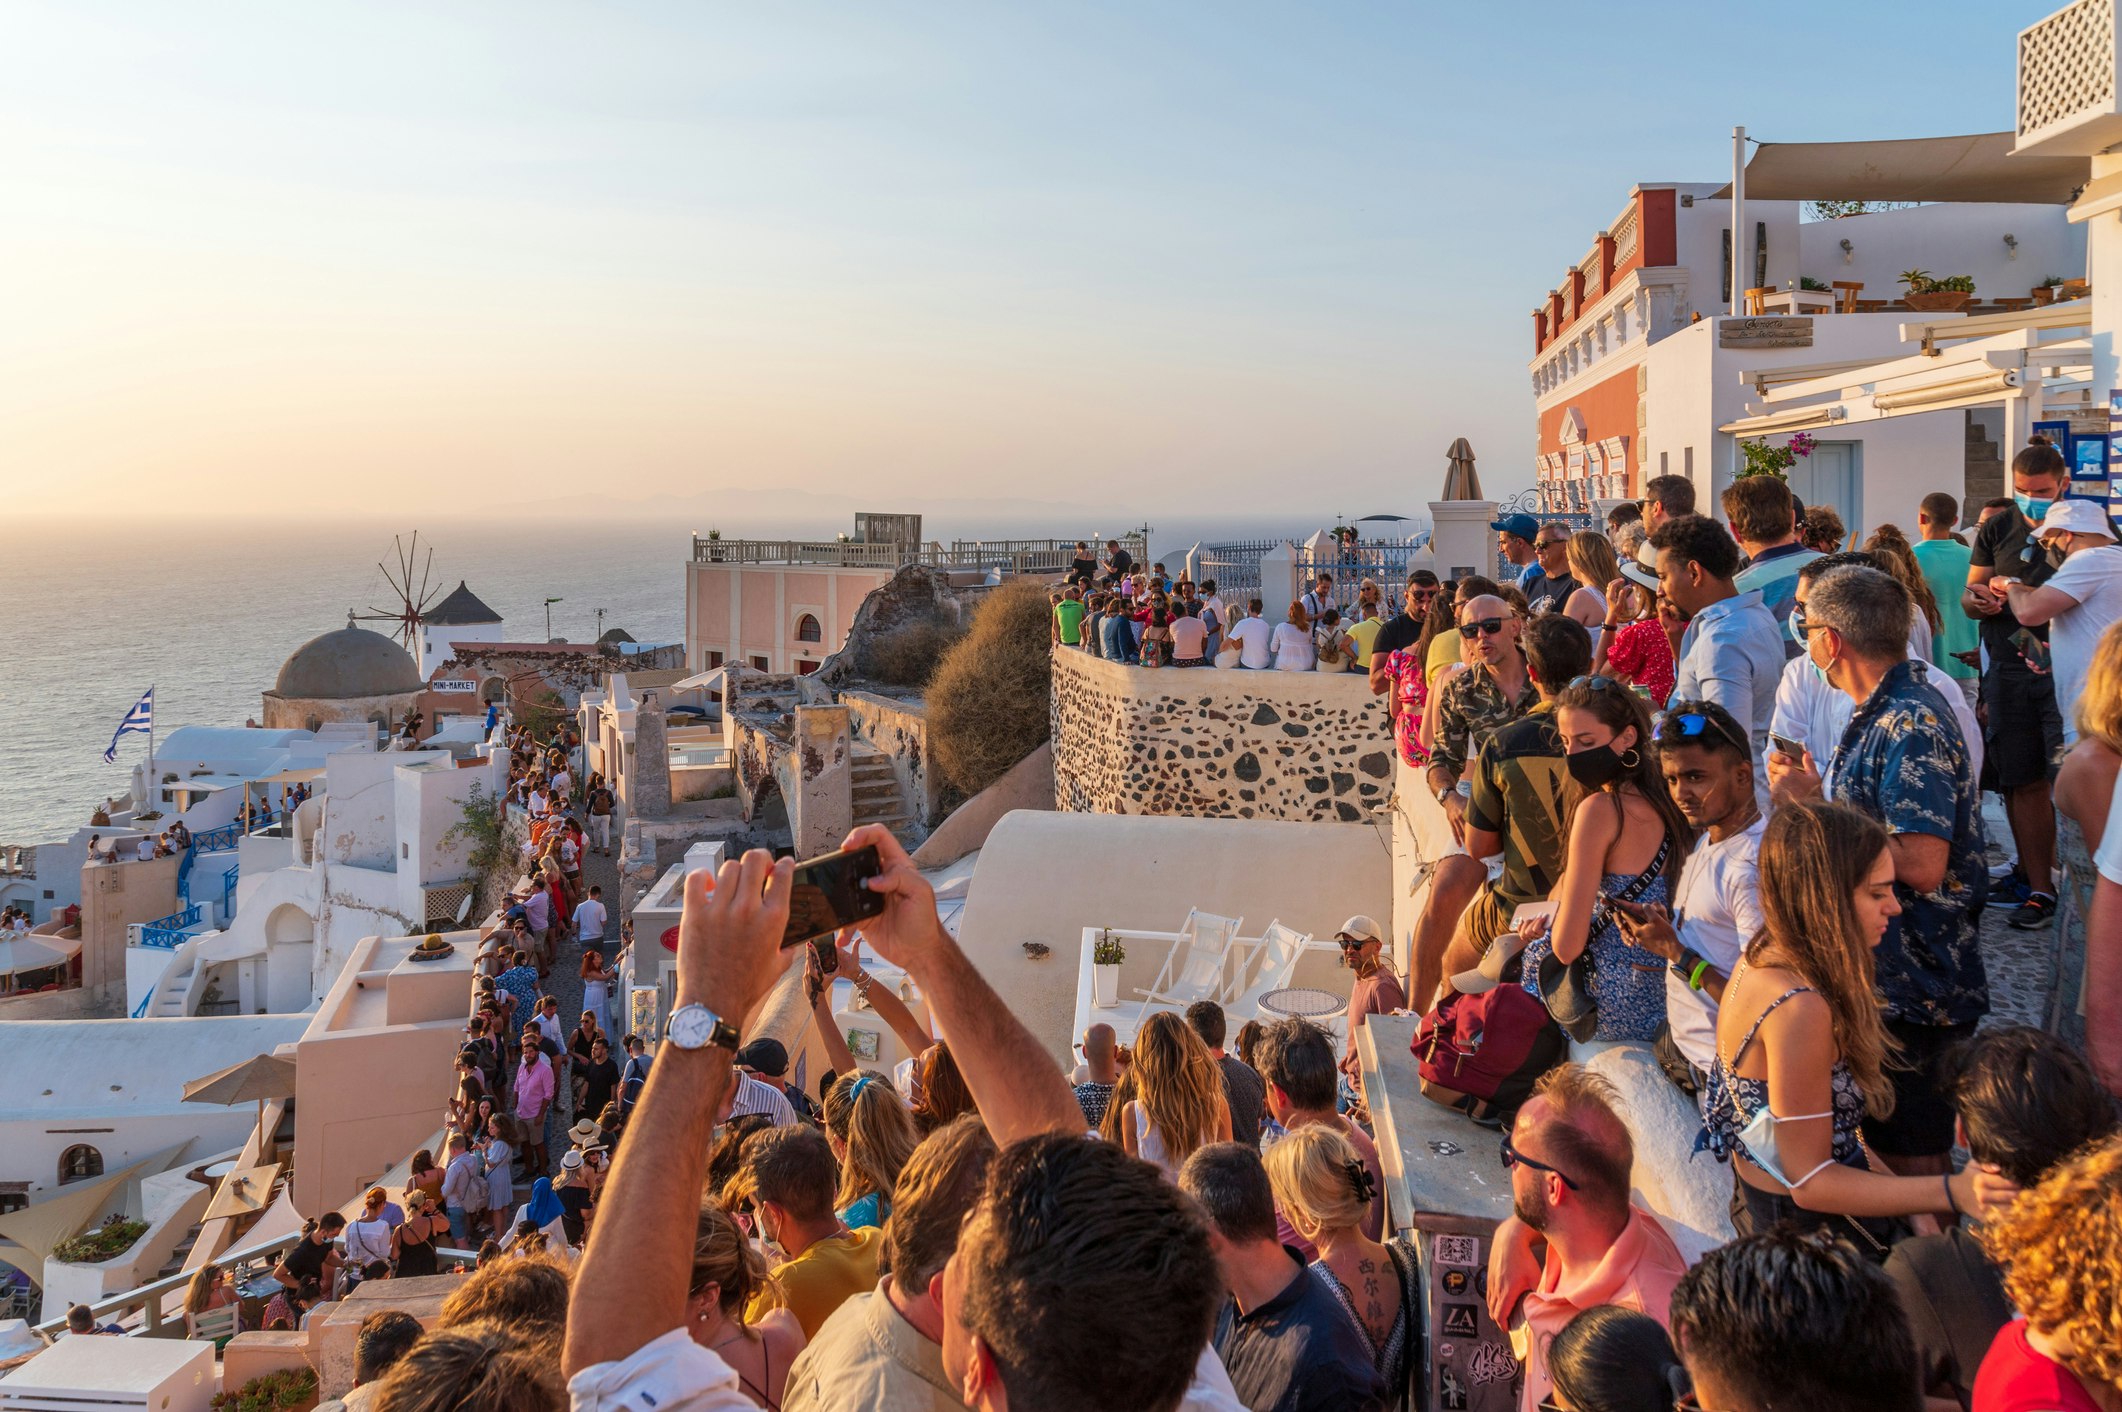 Tourists watching and taking pictures of the sunset in Oia, Santorini, Greece